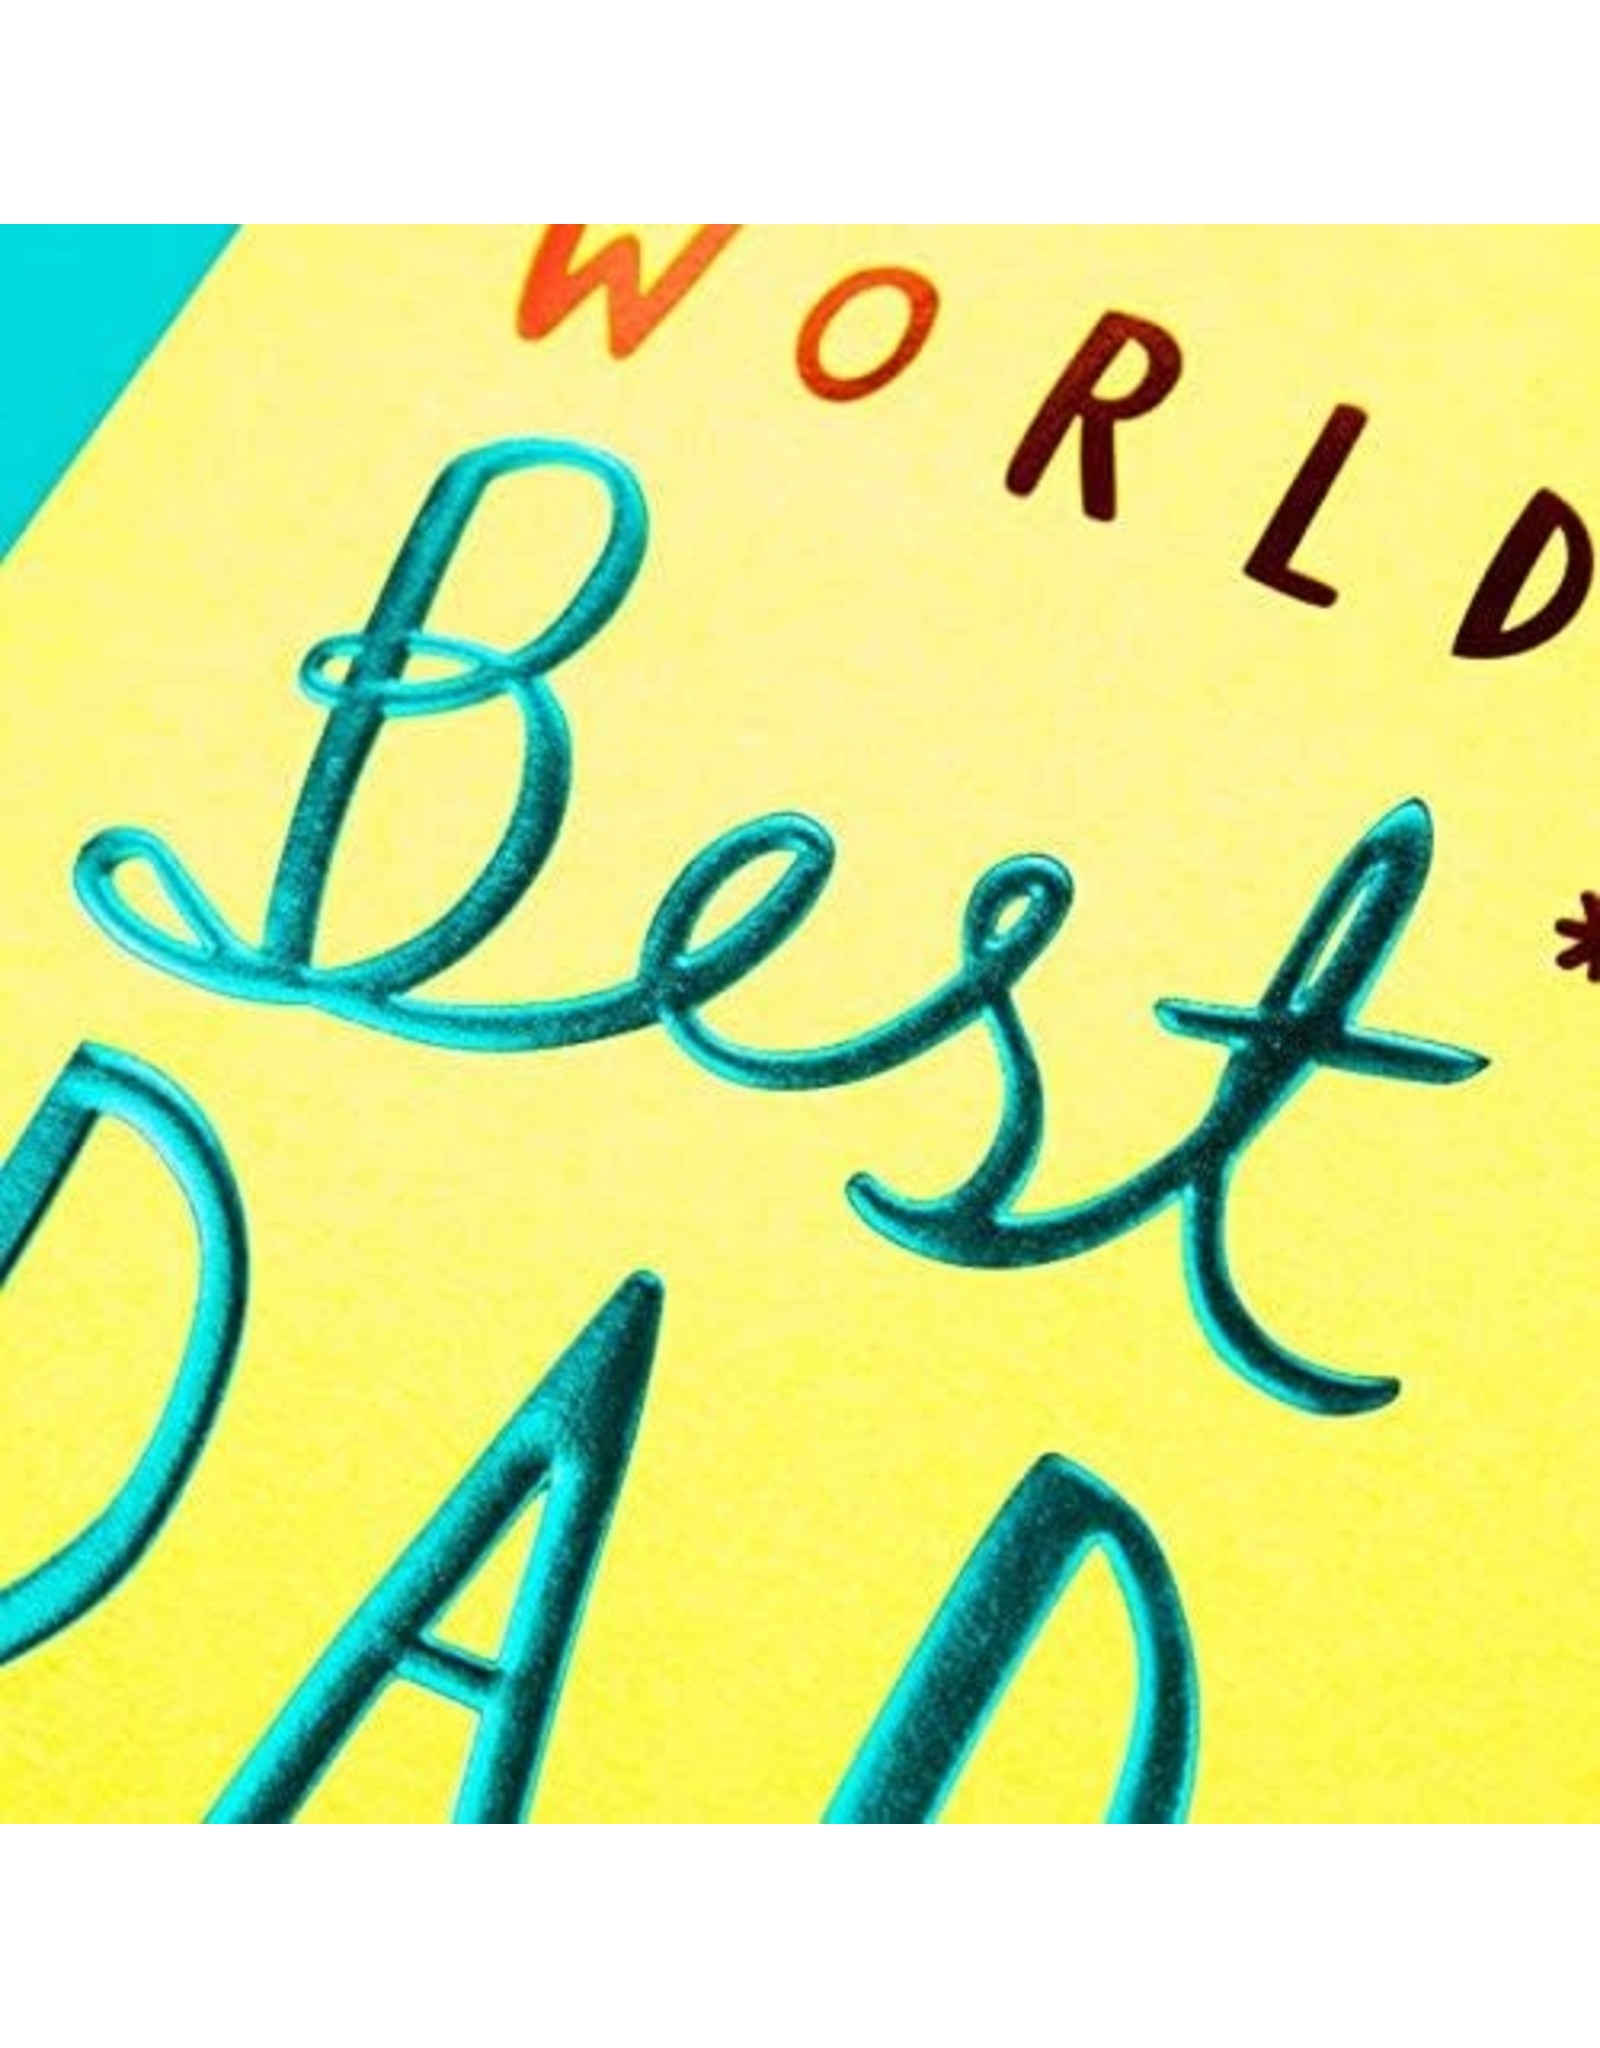 PAPYRUS® Father's Day Cards Worlds Best Dad Card